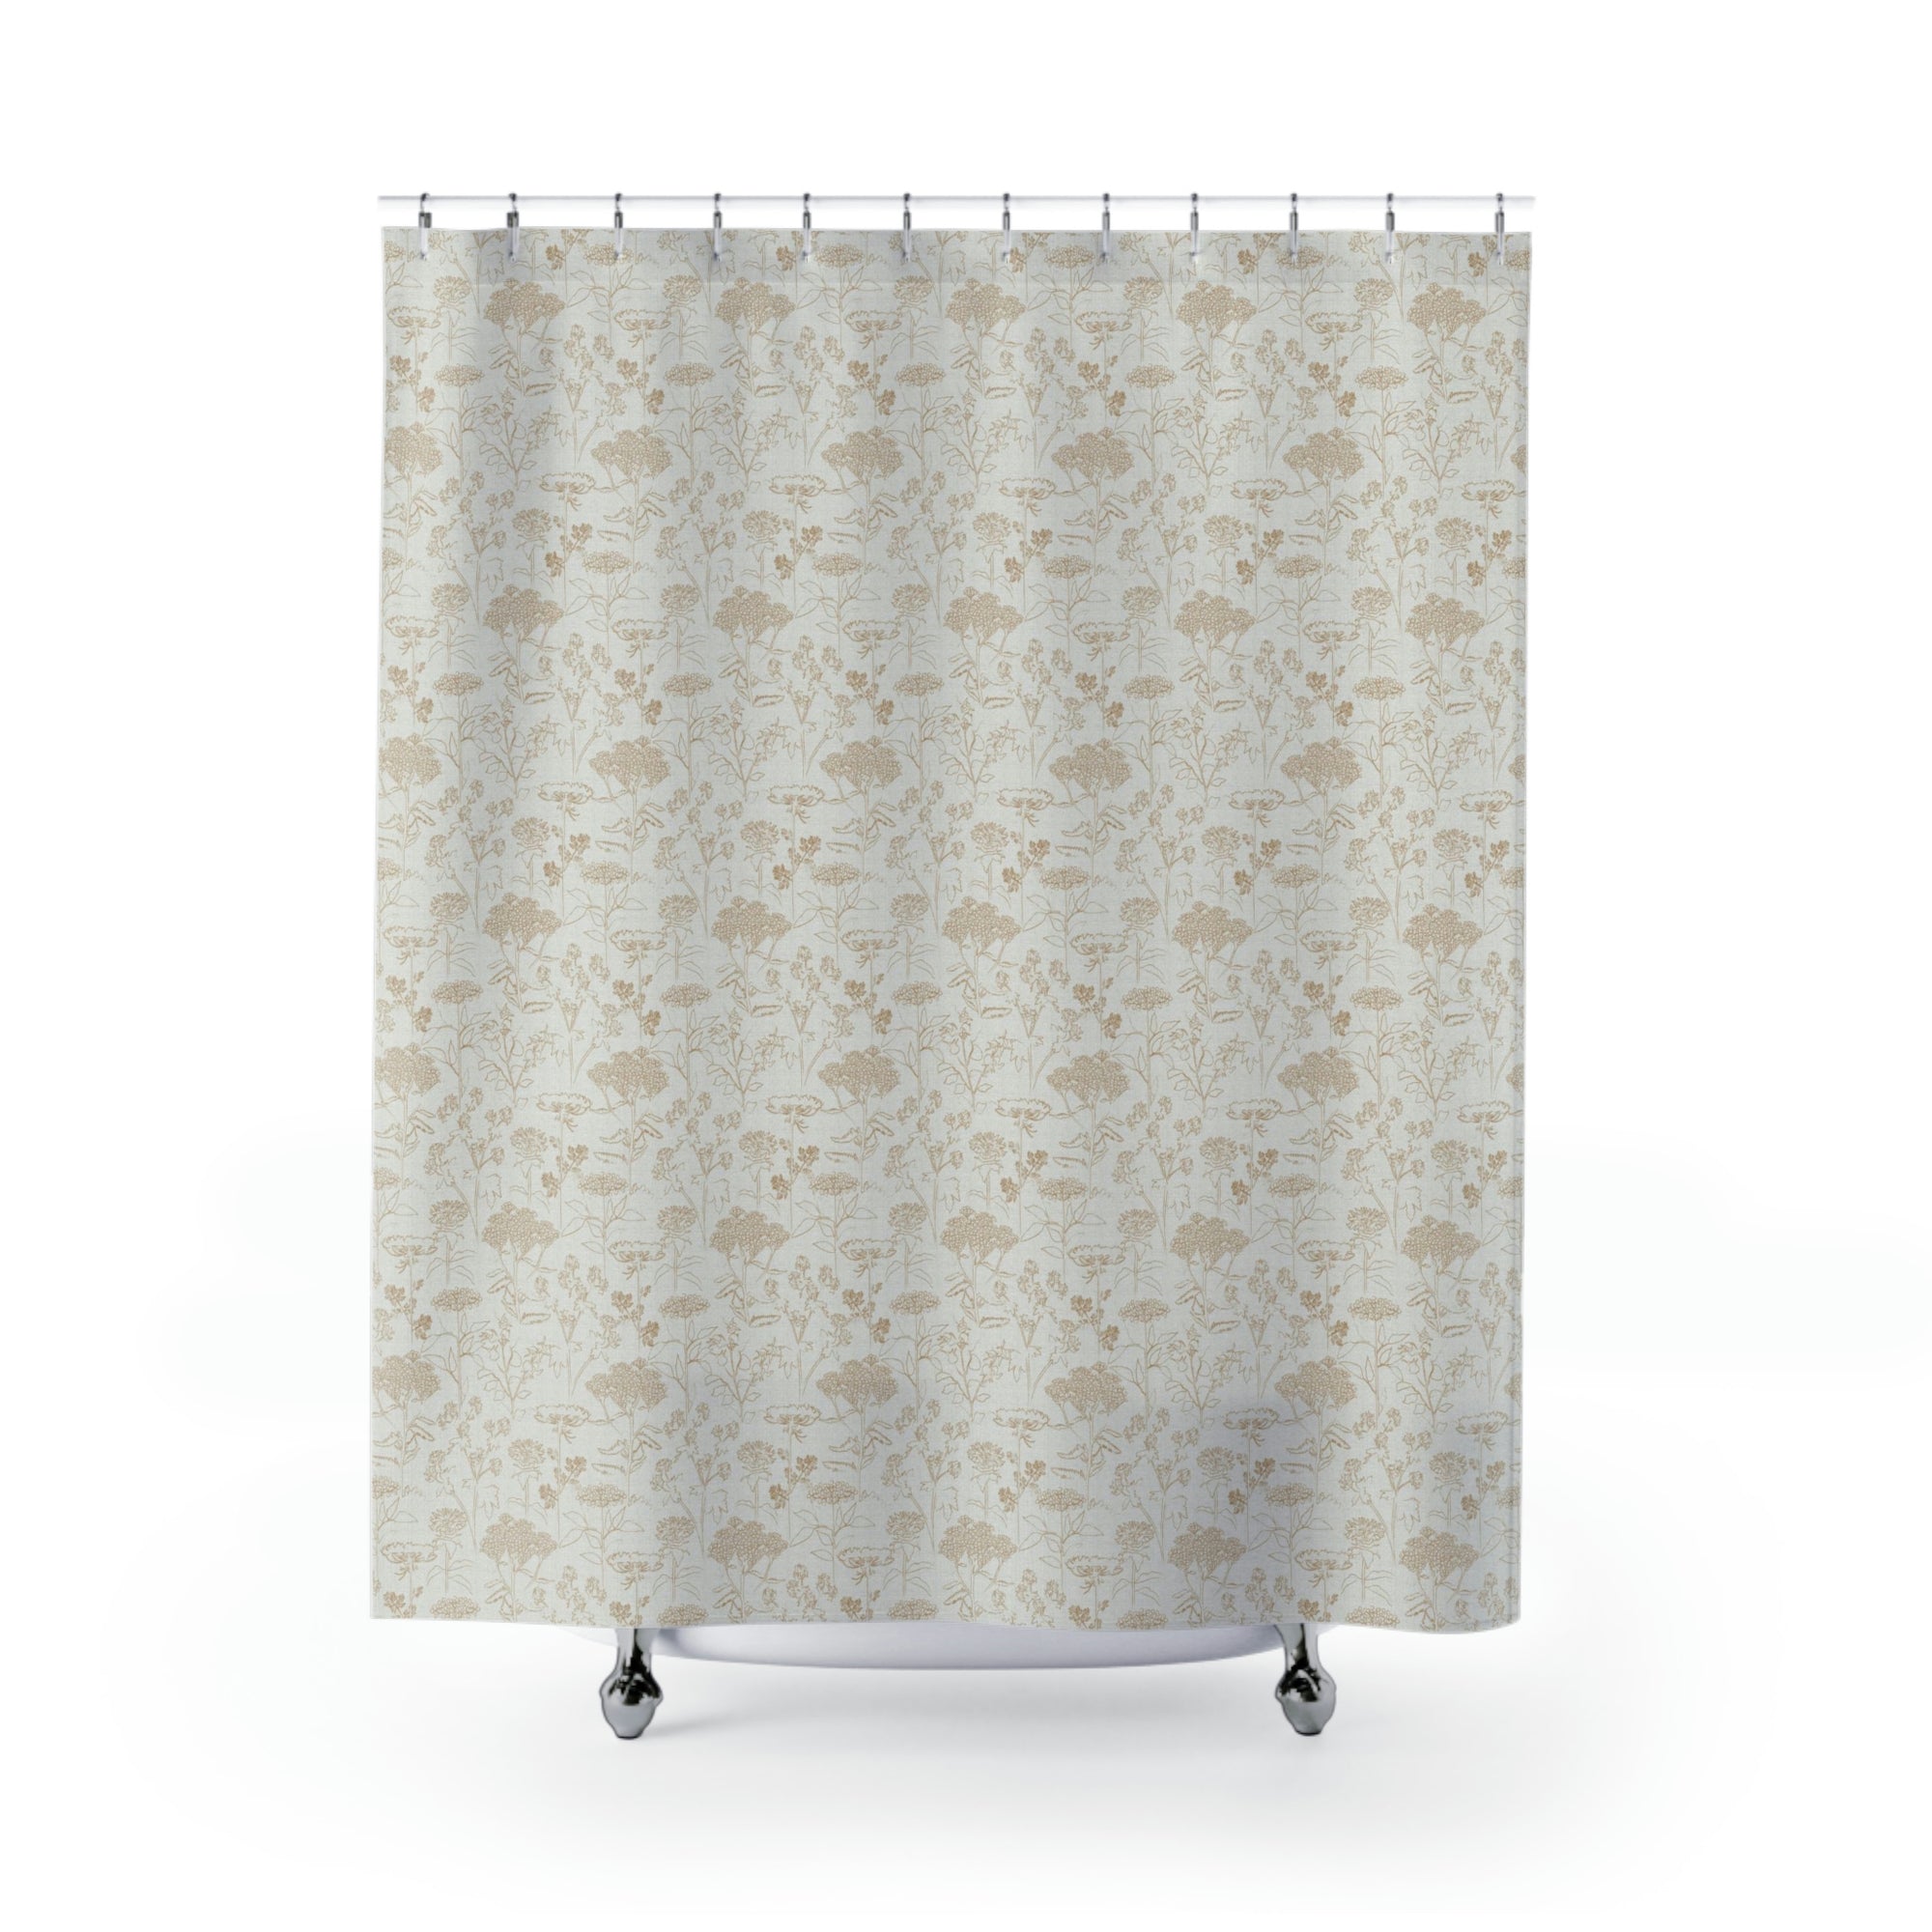 Swallowtail Shower Curtain in White